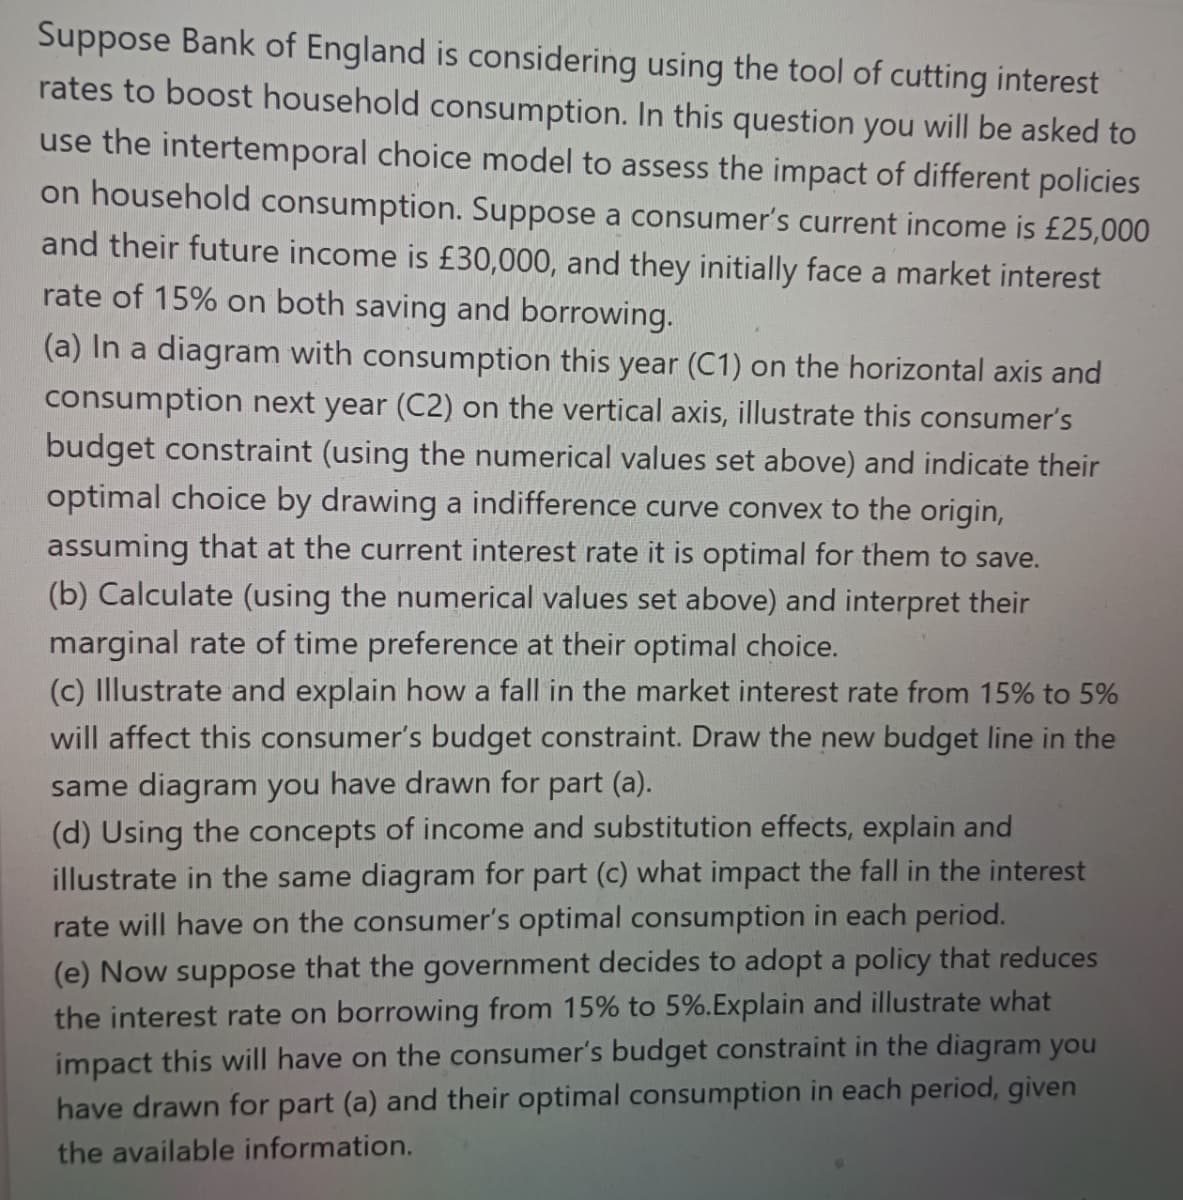 Suppose Bank of England is considering using the tool of cutting interest
rates to boost household consumption. In this question you will be asked to
use the intertemporal choice model to assess the impact of different policies
on household consumption. Suppose a consumer's current income is £25,000
and their future income is £30,000, and they initially face a market interest
rate of 15% on both saving and borrowing.
(a) In a diagram with consumption this year (C1) on the horizontal axis and
consumption next year (C2) on the vertical axis, illustrate this consumer's
budget constraint (using the numerical values set above) and indicate their
optimal choice by drawing a indifference curve convex to the origin,
assuming that at the current interest rate it is optimal for them to save.
(b) Calculate (using the numerical values set above) and interpret their
marginal rate of time preference at their optimal choice.
(c) Illustrate and explain how a fall in the market interest rate from 15% to 5%
will affect this consumer's budget constraint. Draw the new budget line in the
same diagram you have drawn for part (a).
(d) Using the concepts of income and substitution effects, explain and
illustrate in the same diagram for part
what impact the fall in the interest
rate will have on the consumer's optimal consumption in each period.
(e) Now suppose that the government decides to adopt a policy that reduces
the interest rate on borrowing from 15% to 5%.Explain and illustrate what
impact this will have on the consumer's budget constraint in the diagram you
have drawn for part (a) and their optimal consumption in each period, given
the available information.
